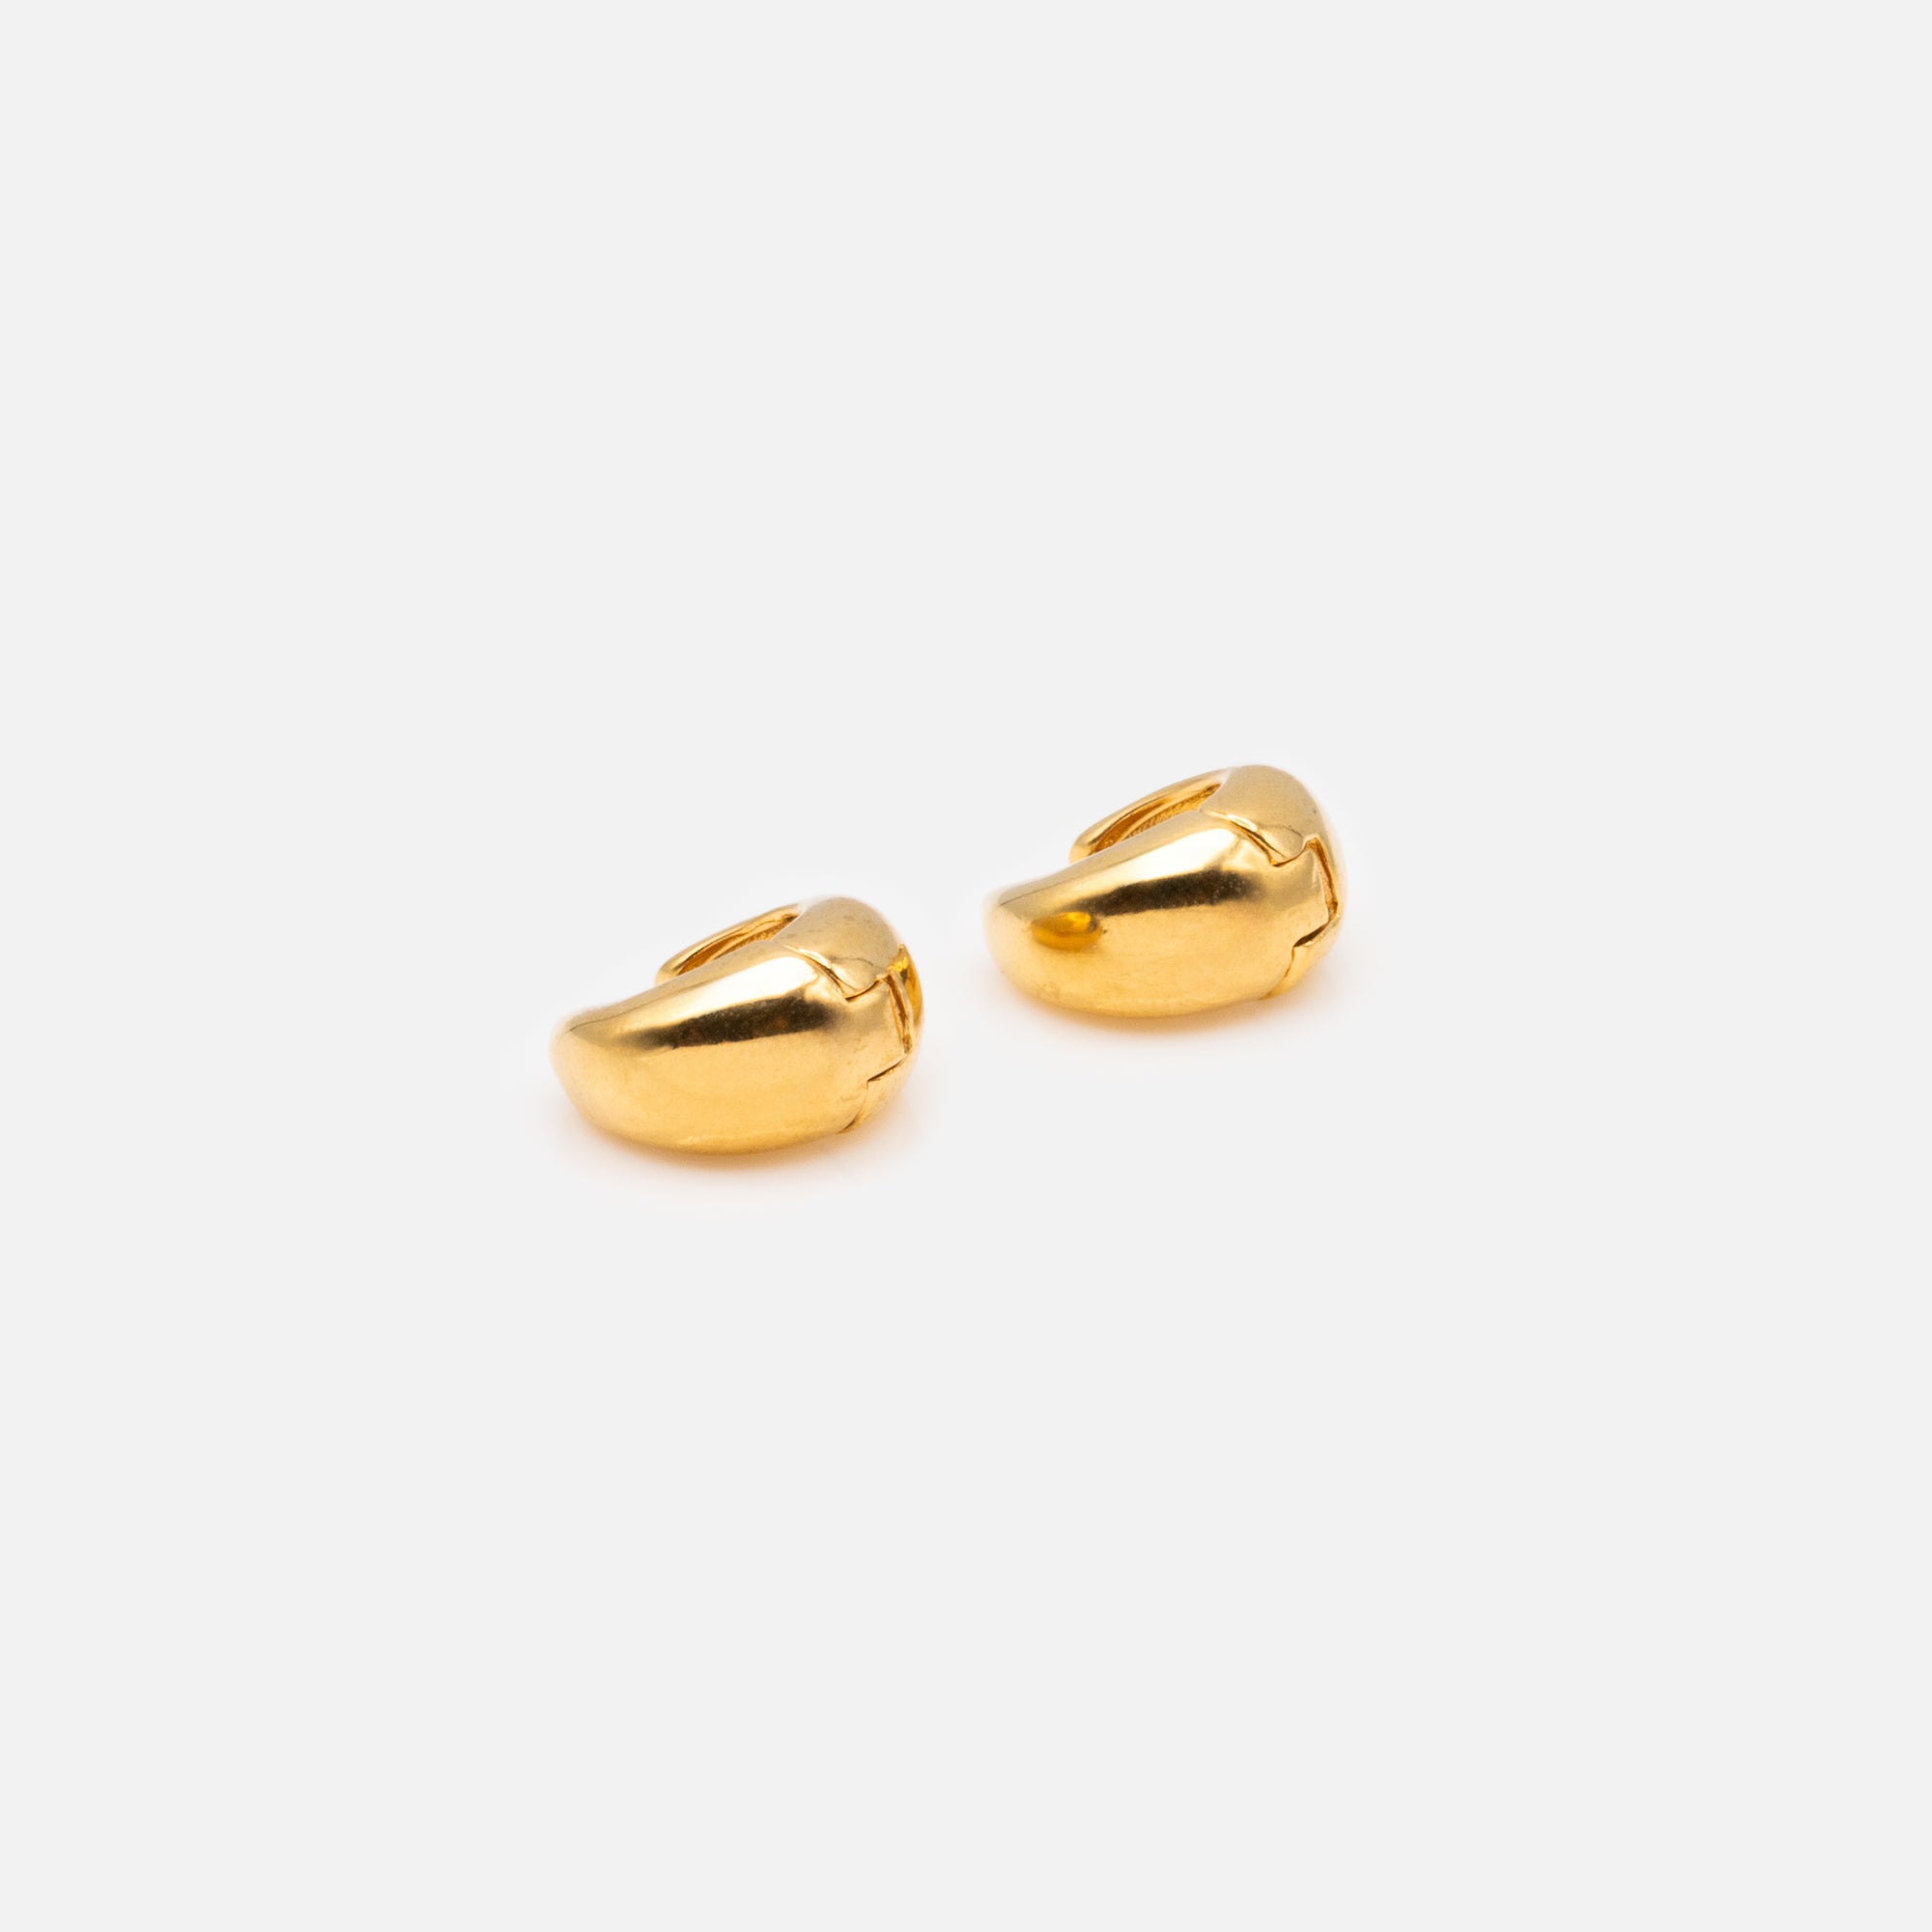 Small gold hoop earrings 16 mm with wide base in stainless steel